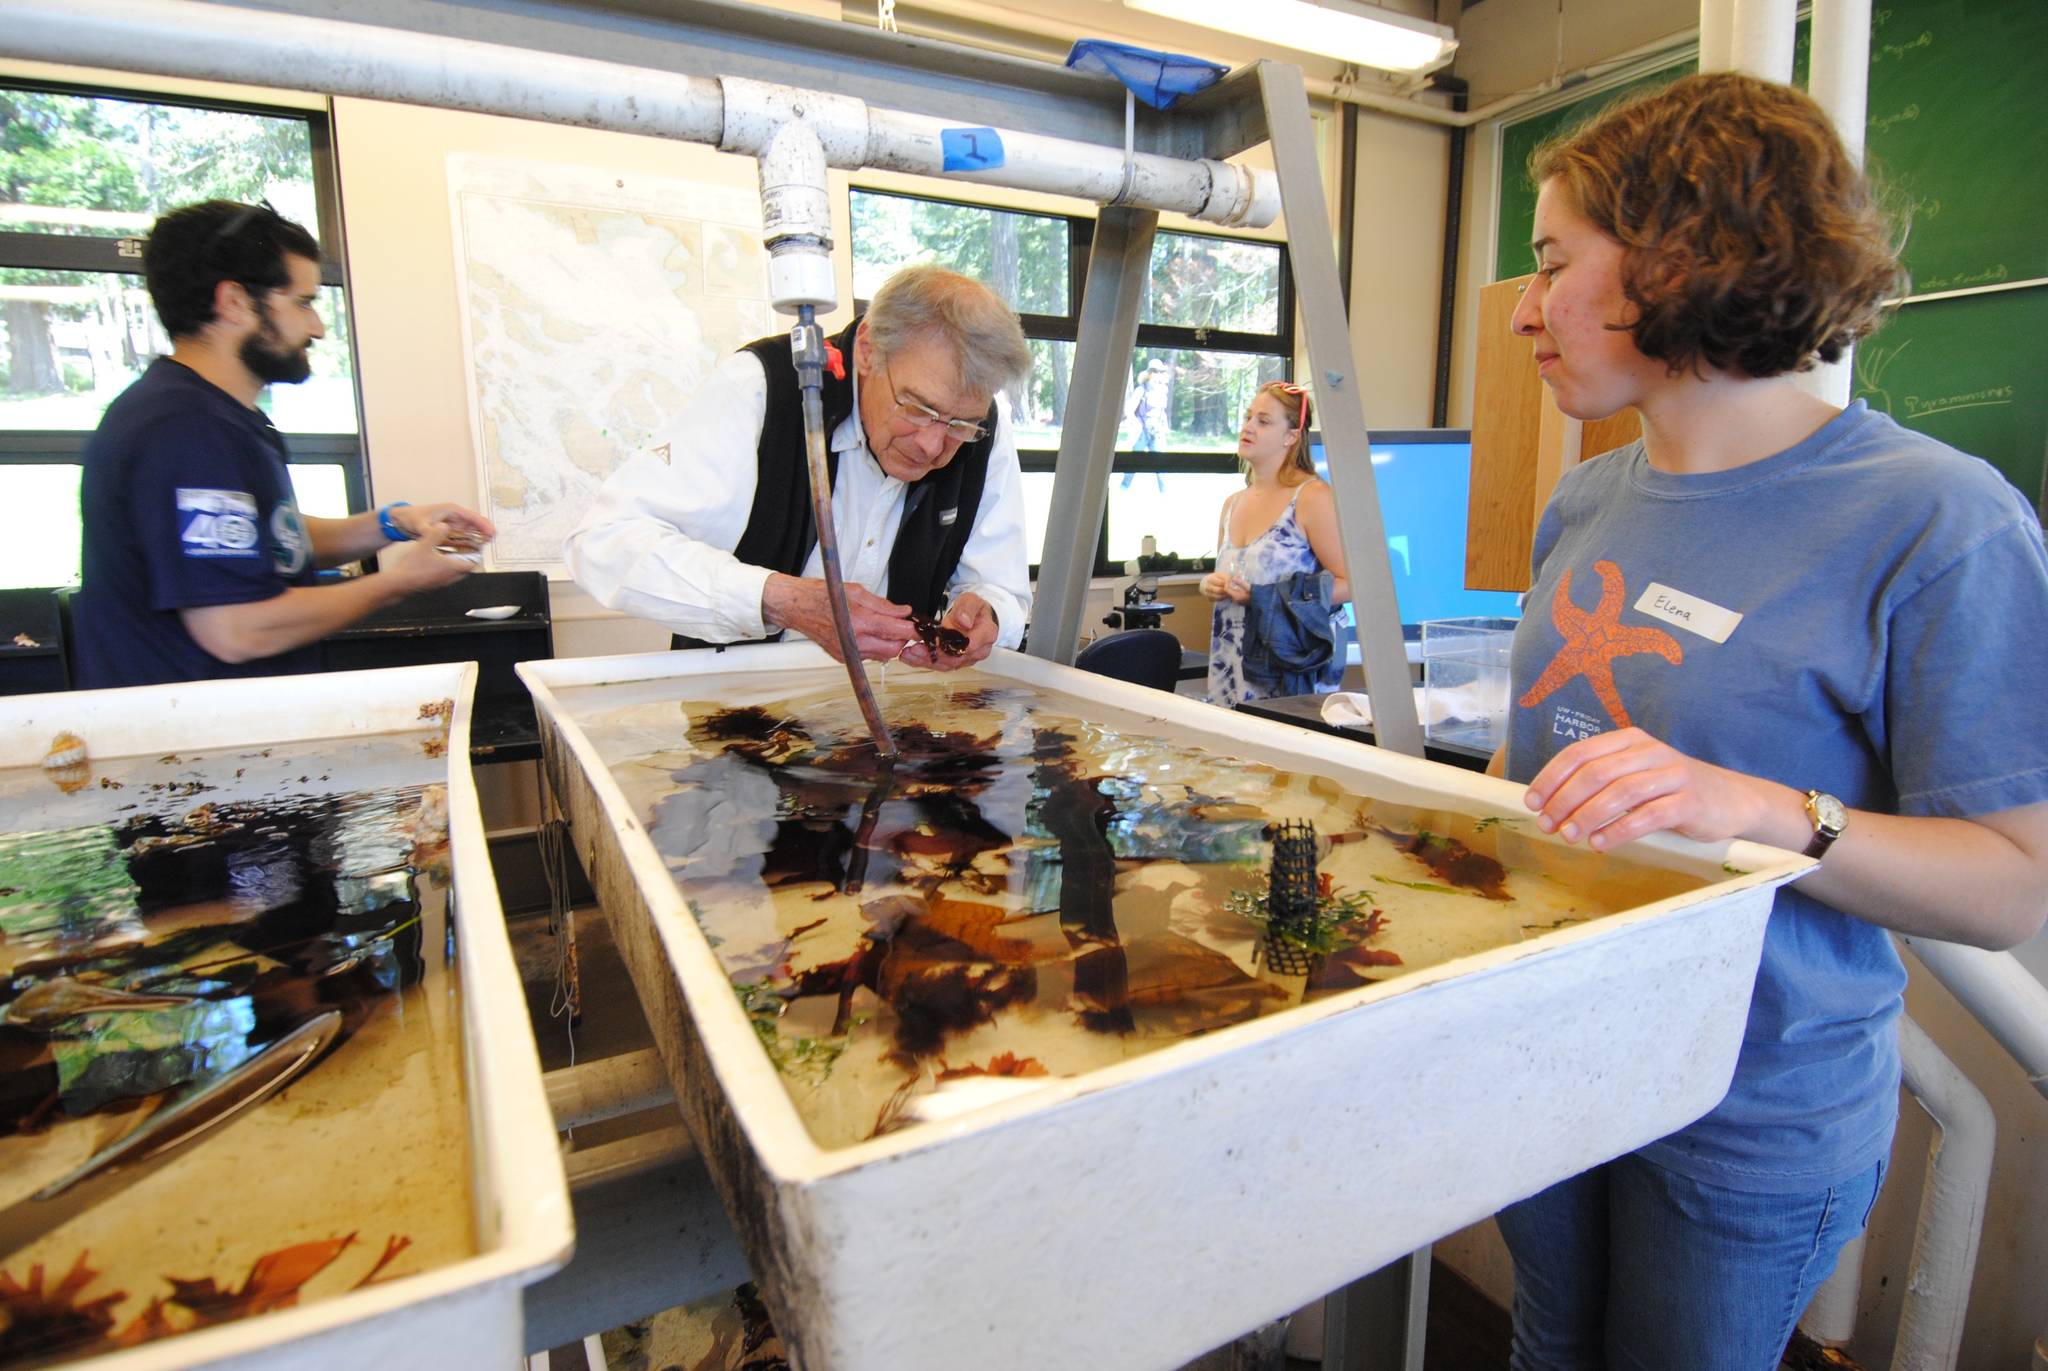 Find a love for learning at Friday Harbor Labs Open House